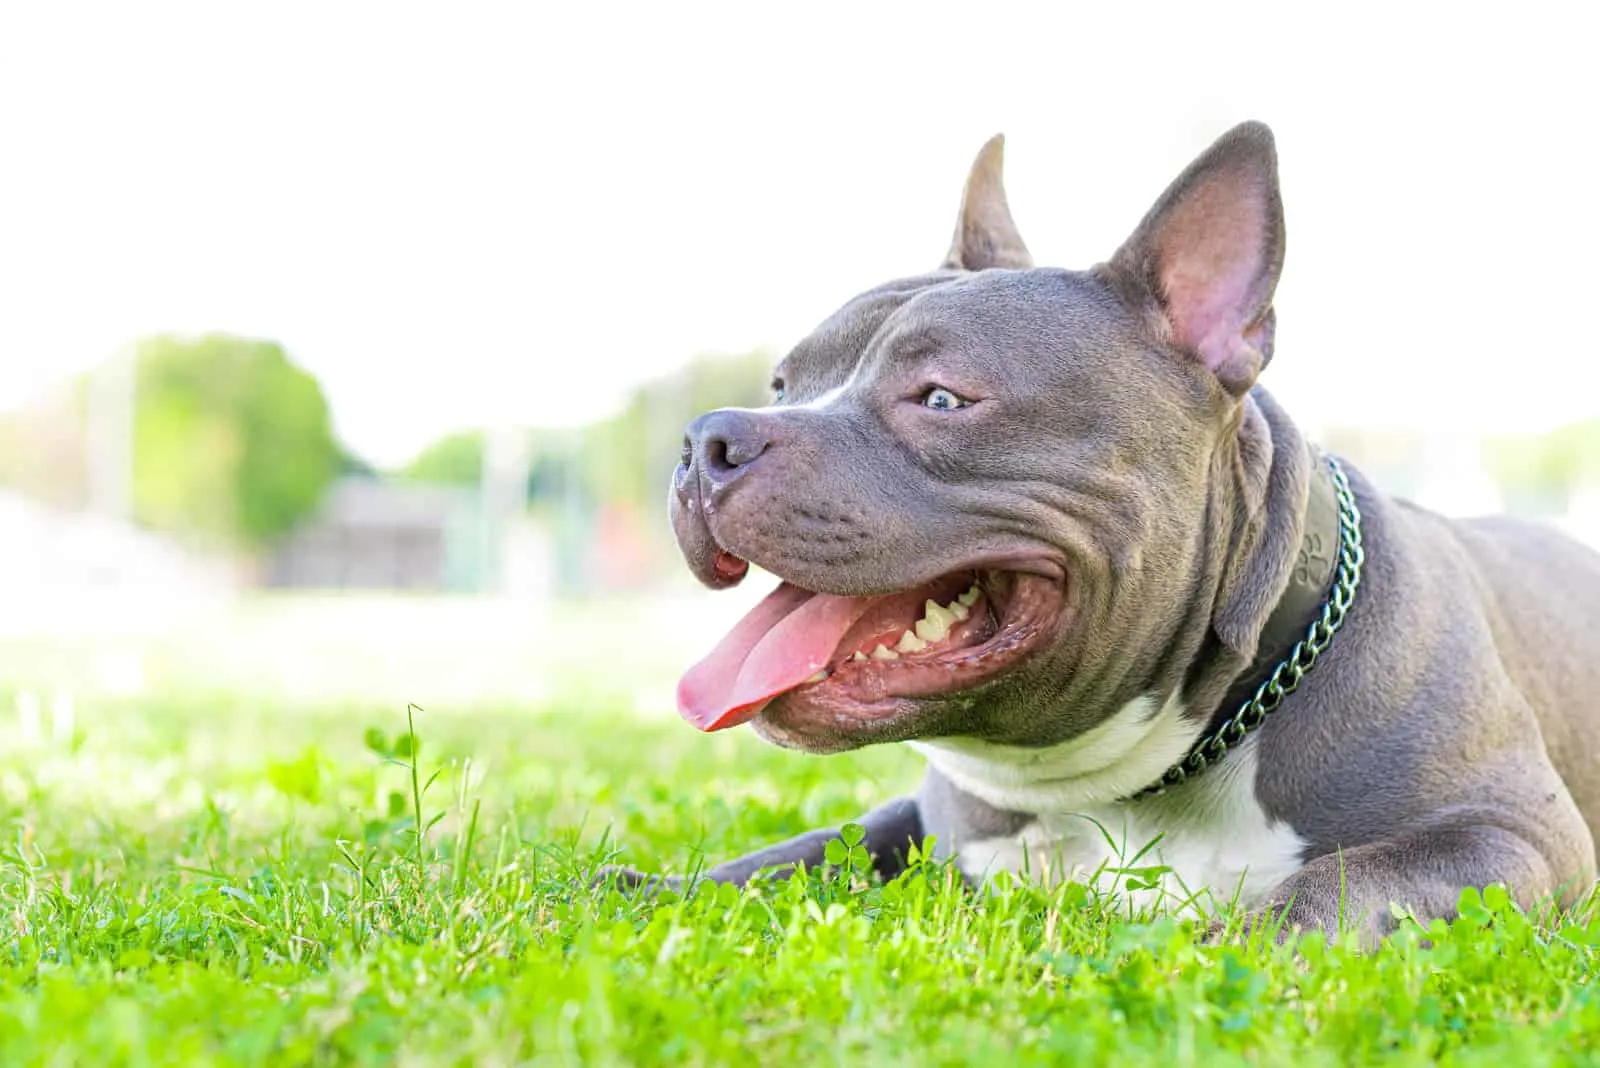 Blue American Bully sitting on grass outside